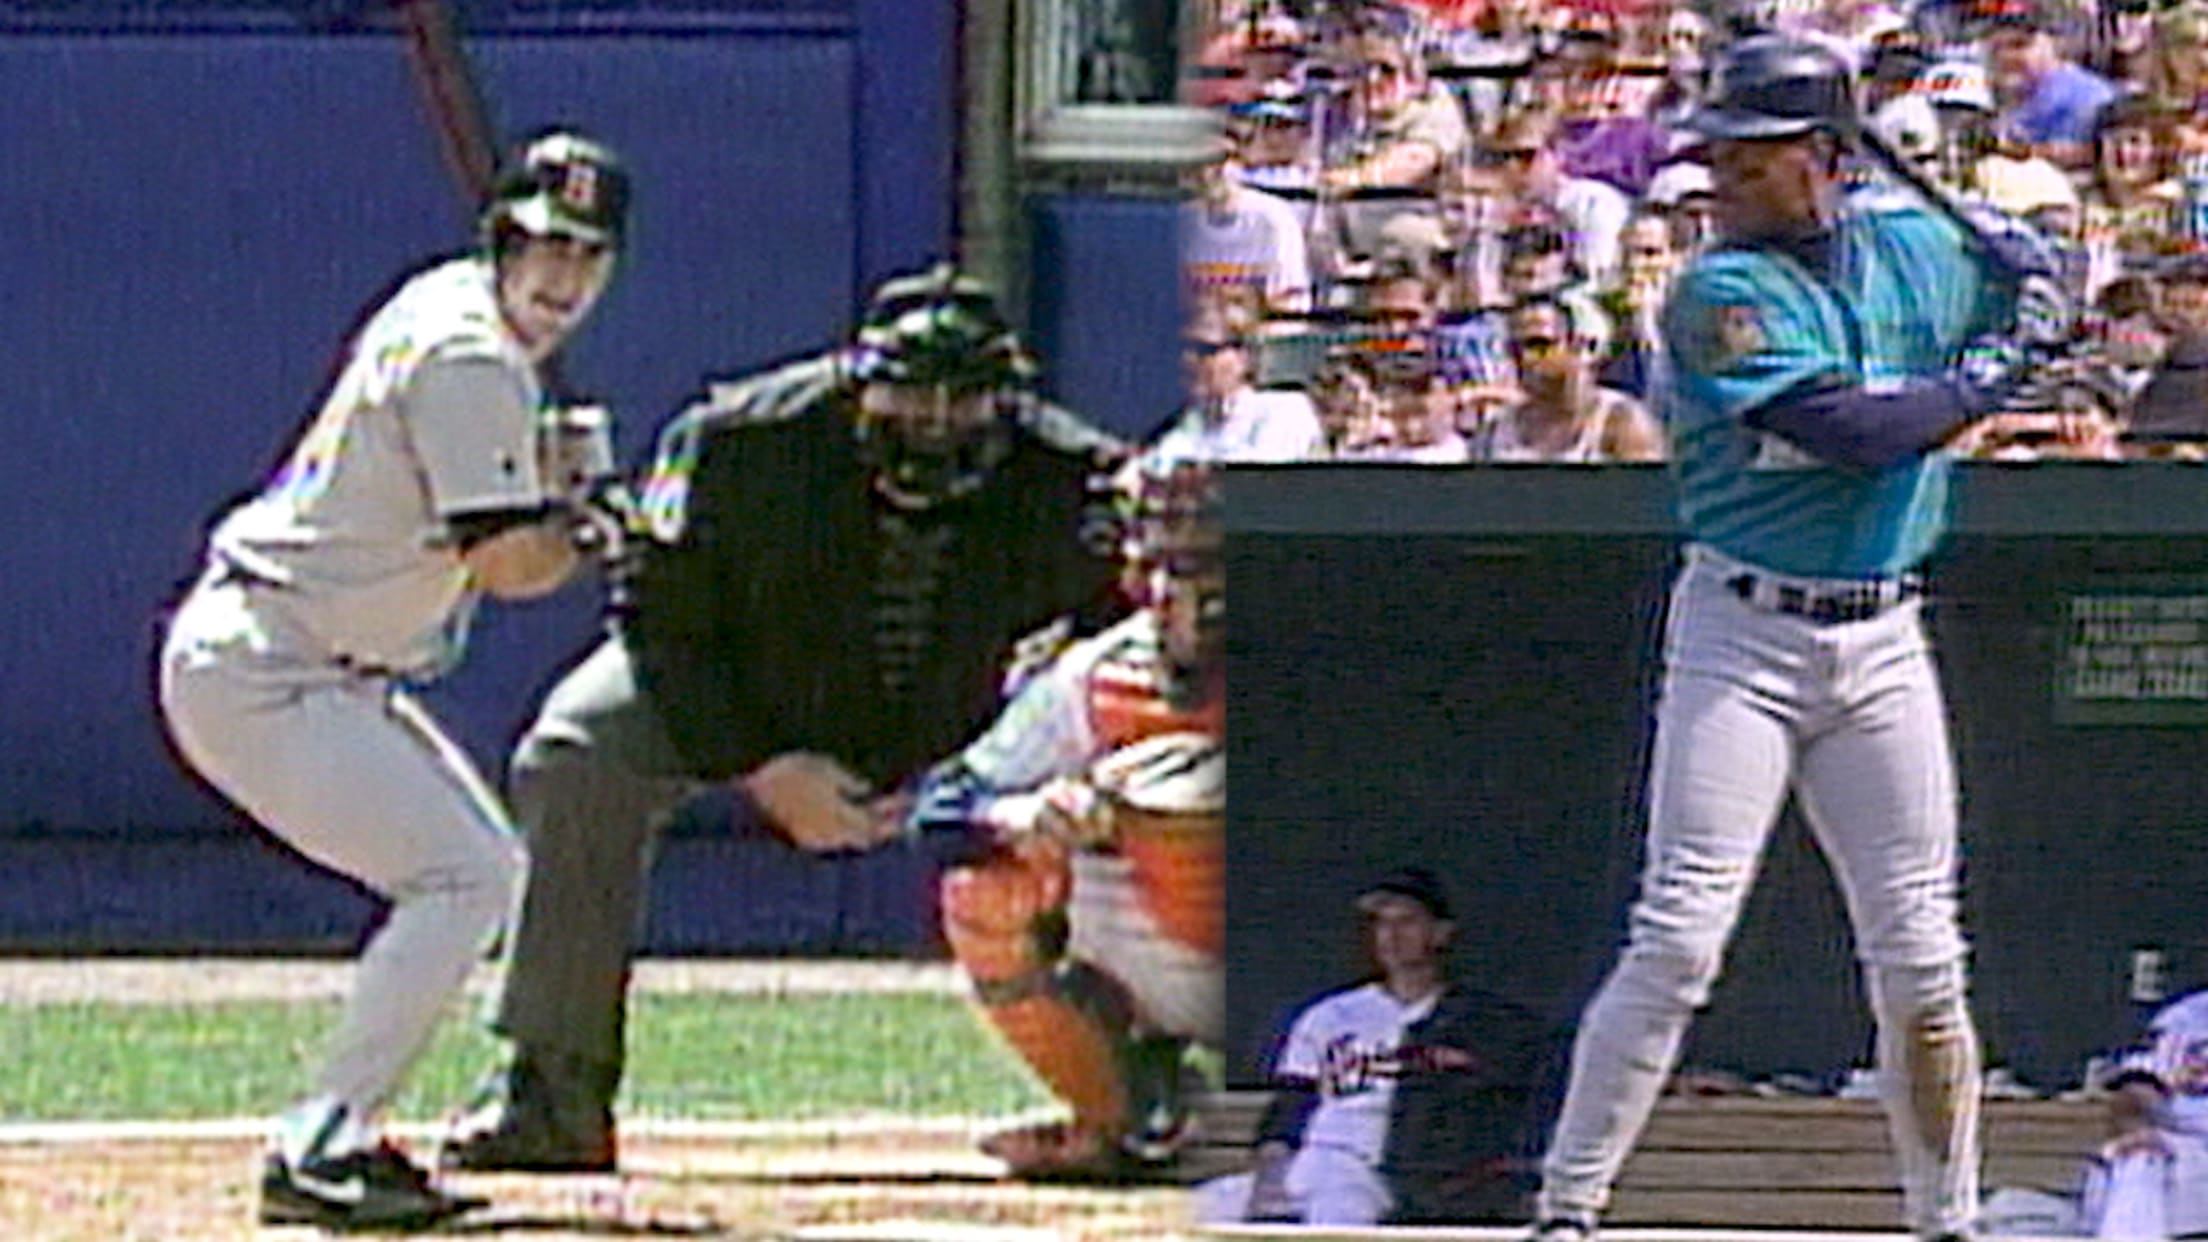 Who has the greatest batting stance ever? : r/baseball